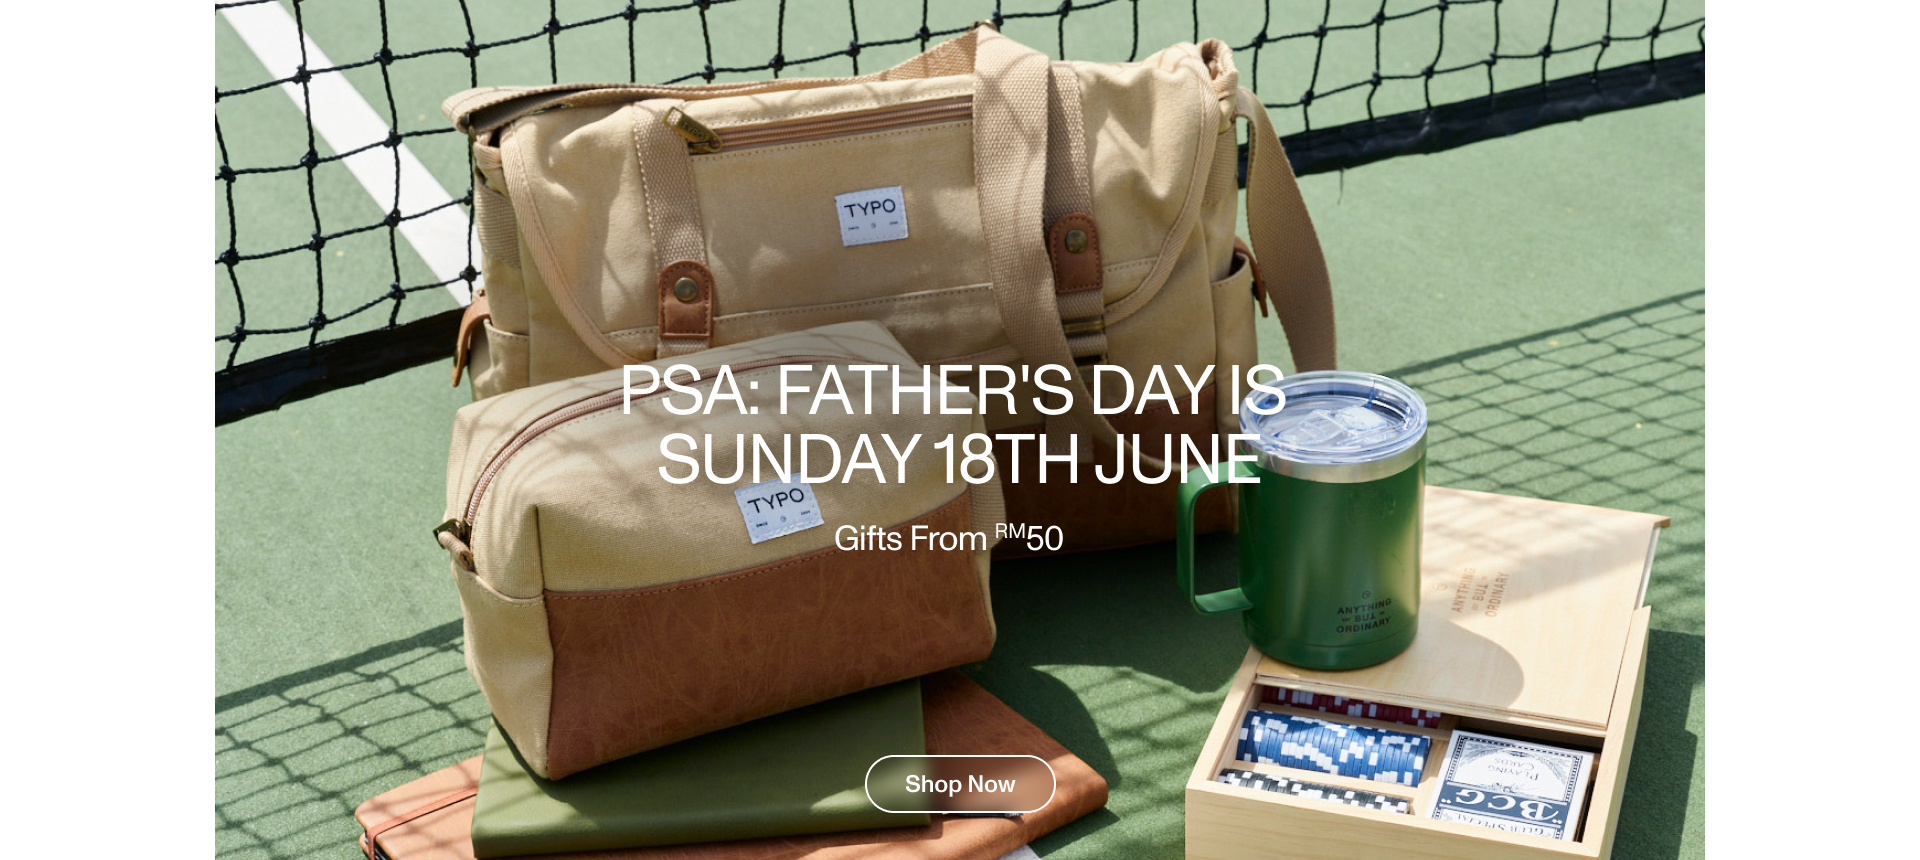 PSA: Father's Day Is Sunday 18th June. Gifts From RM50. Shop Now.